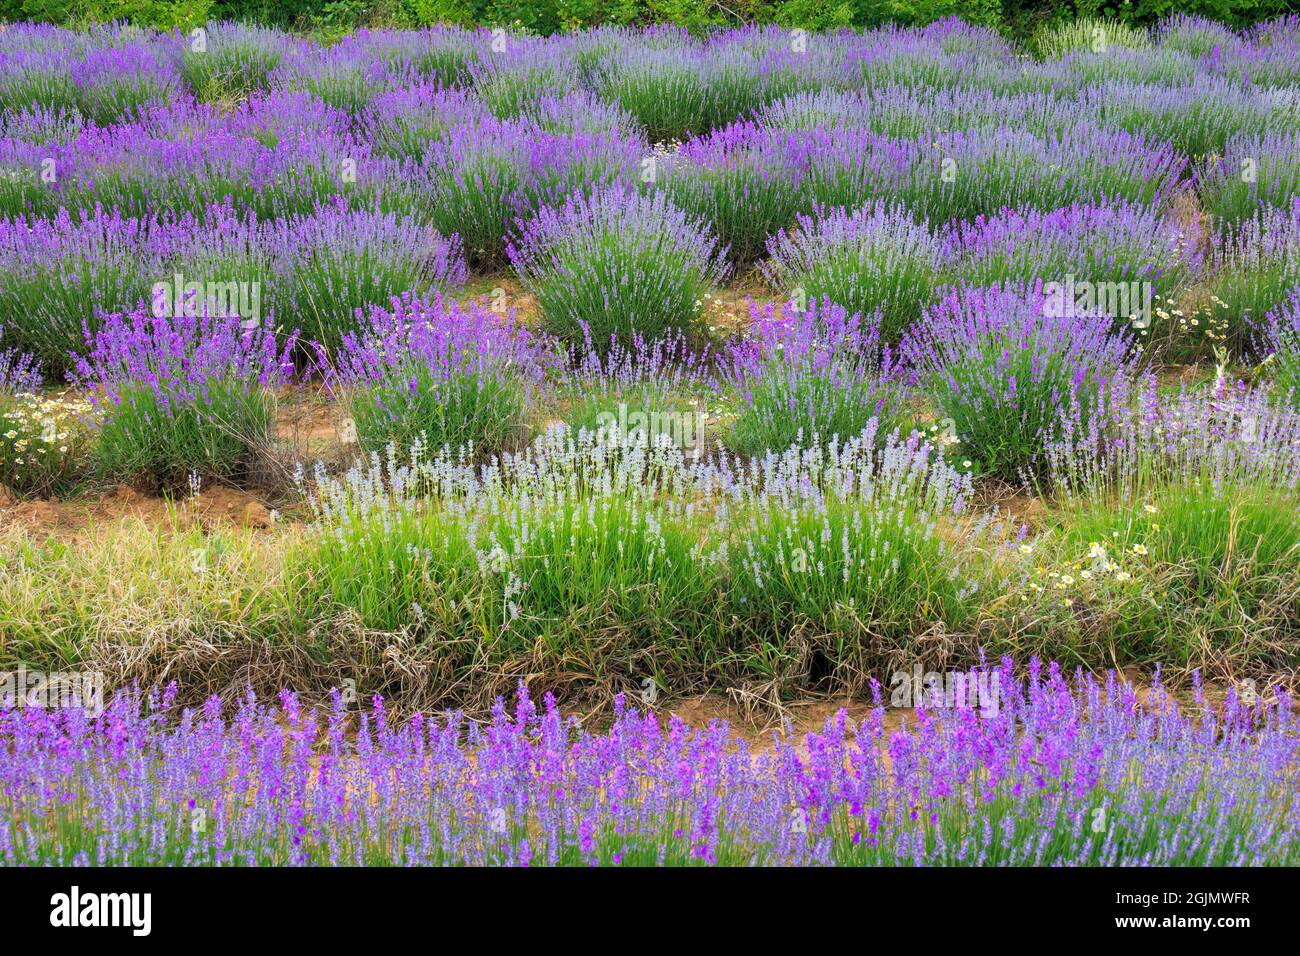 Blue lavender herb at the end of summer season Stock Photo